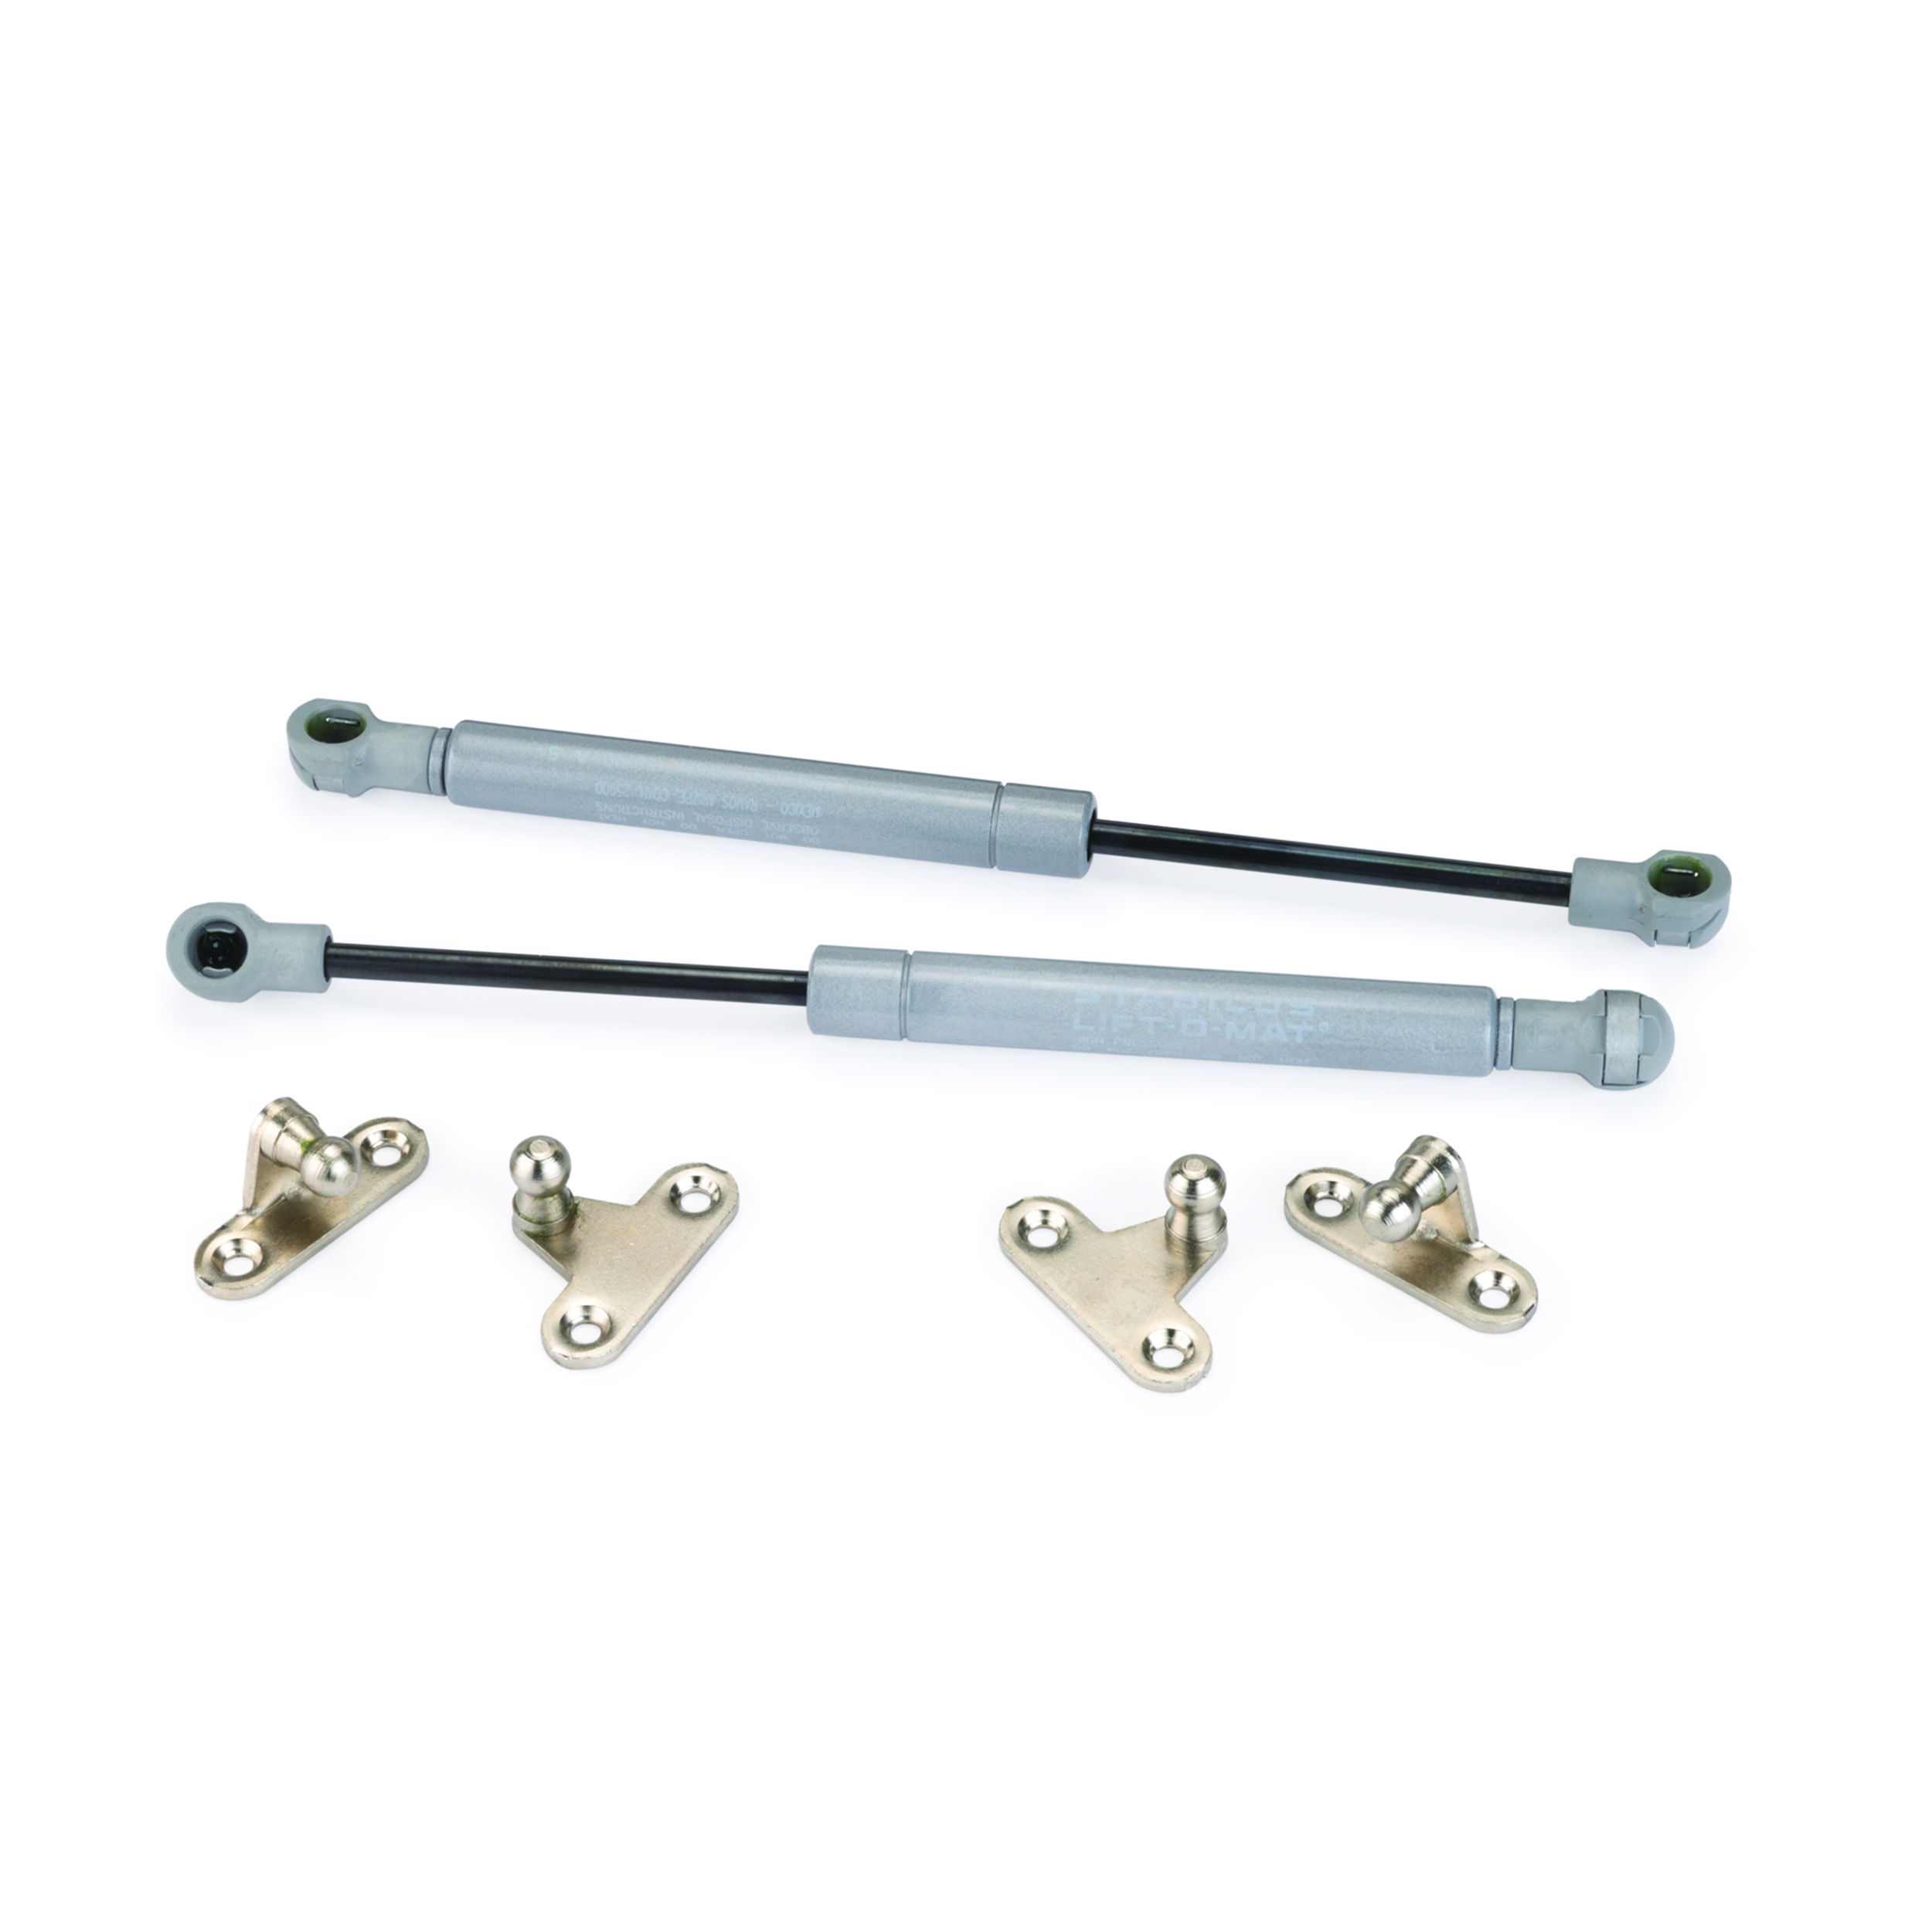 Lift-o-mat Gas Springs From Stabilus 150 Silver, Pair